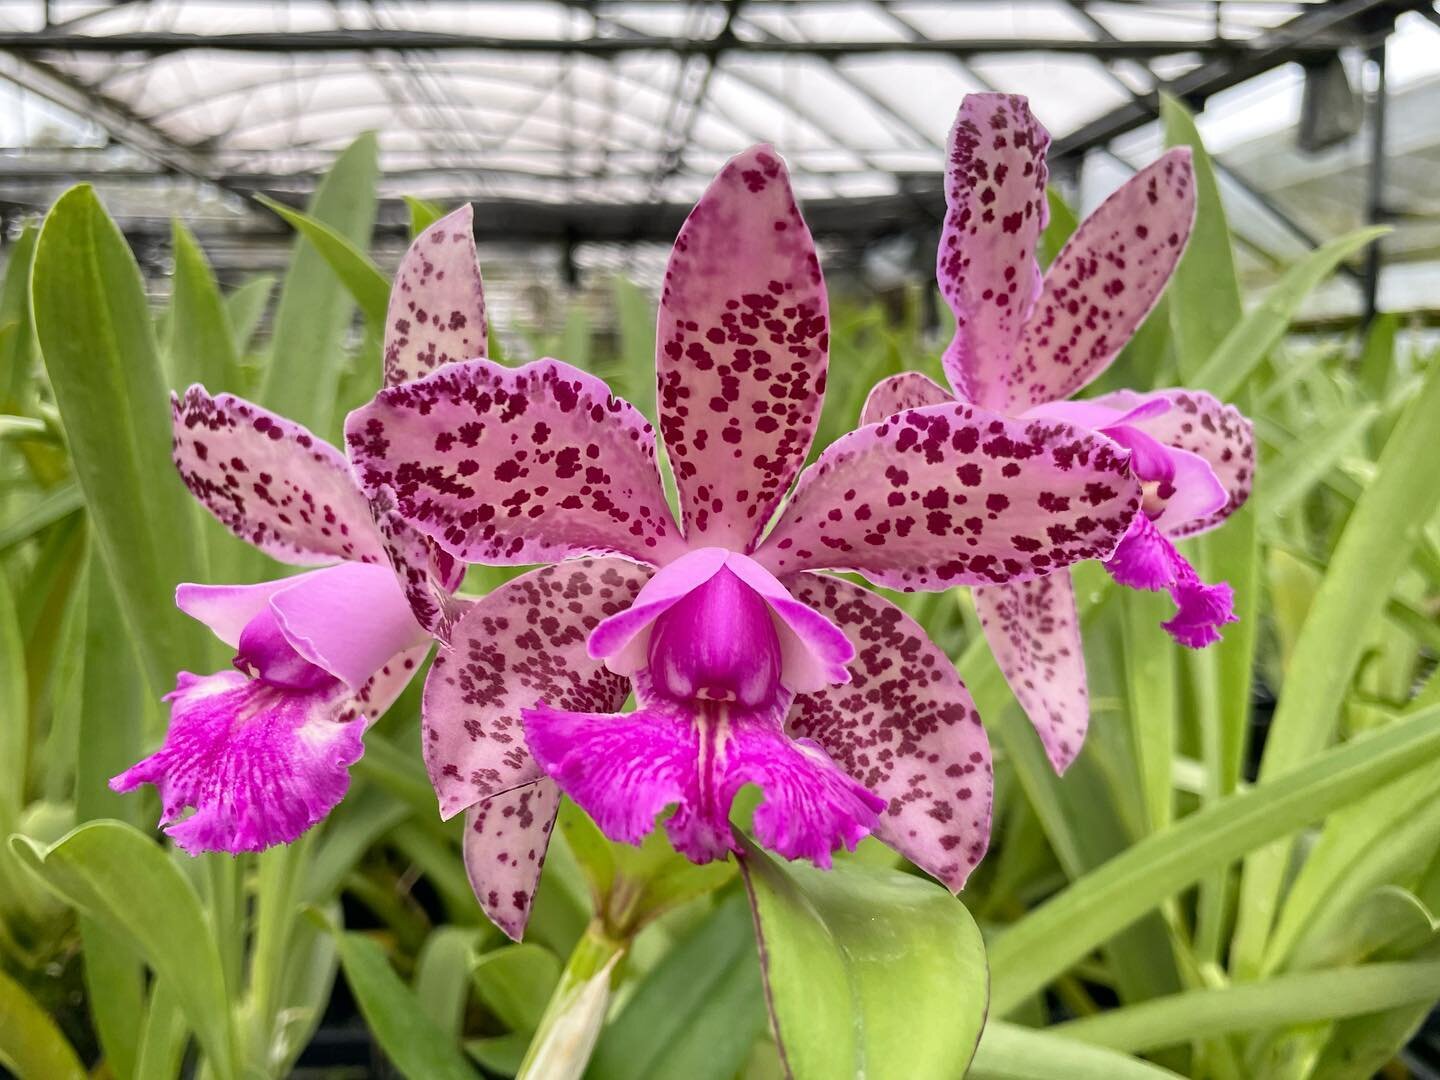 Delighted the April showers brought us this stunning C. Spotted Delight &lsquo;May Flower&rsquo; 😍.

#orchids #cattleya #spotted #mayflowers #orchidphotography #purpleorchids #pinkorchids #wholesaleorchids #hiloorchidfarm